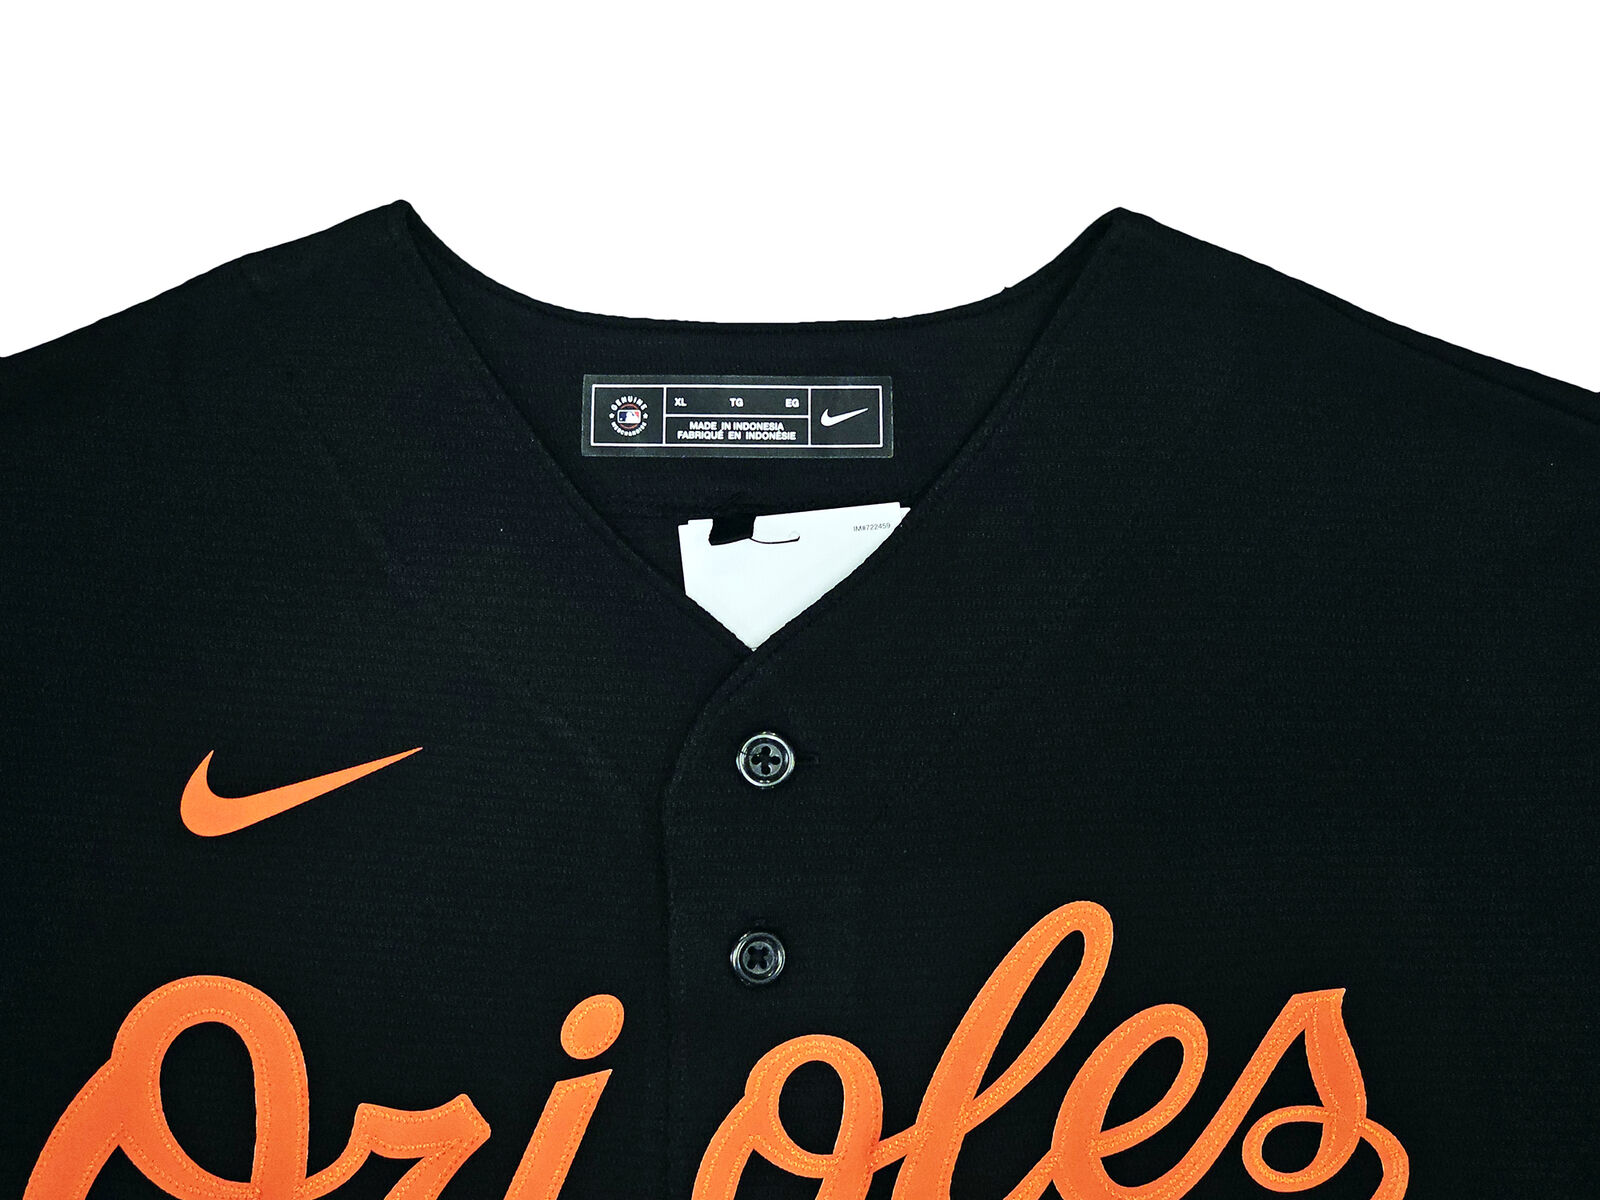 Adley Rutschman Baltimore Orioles Autographed White Nike Authentic Jersey